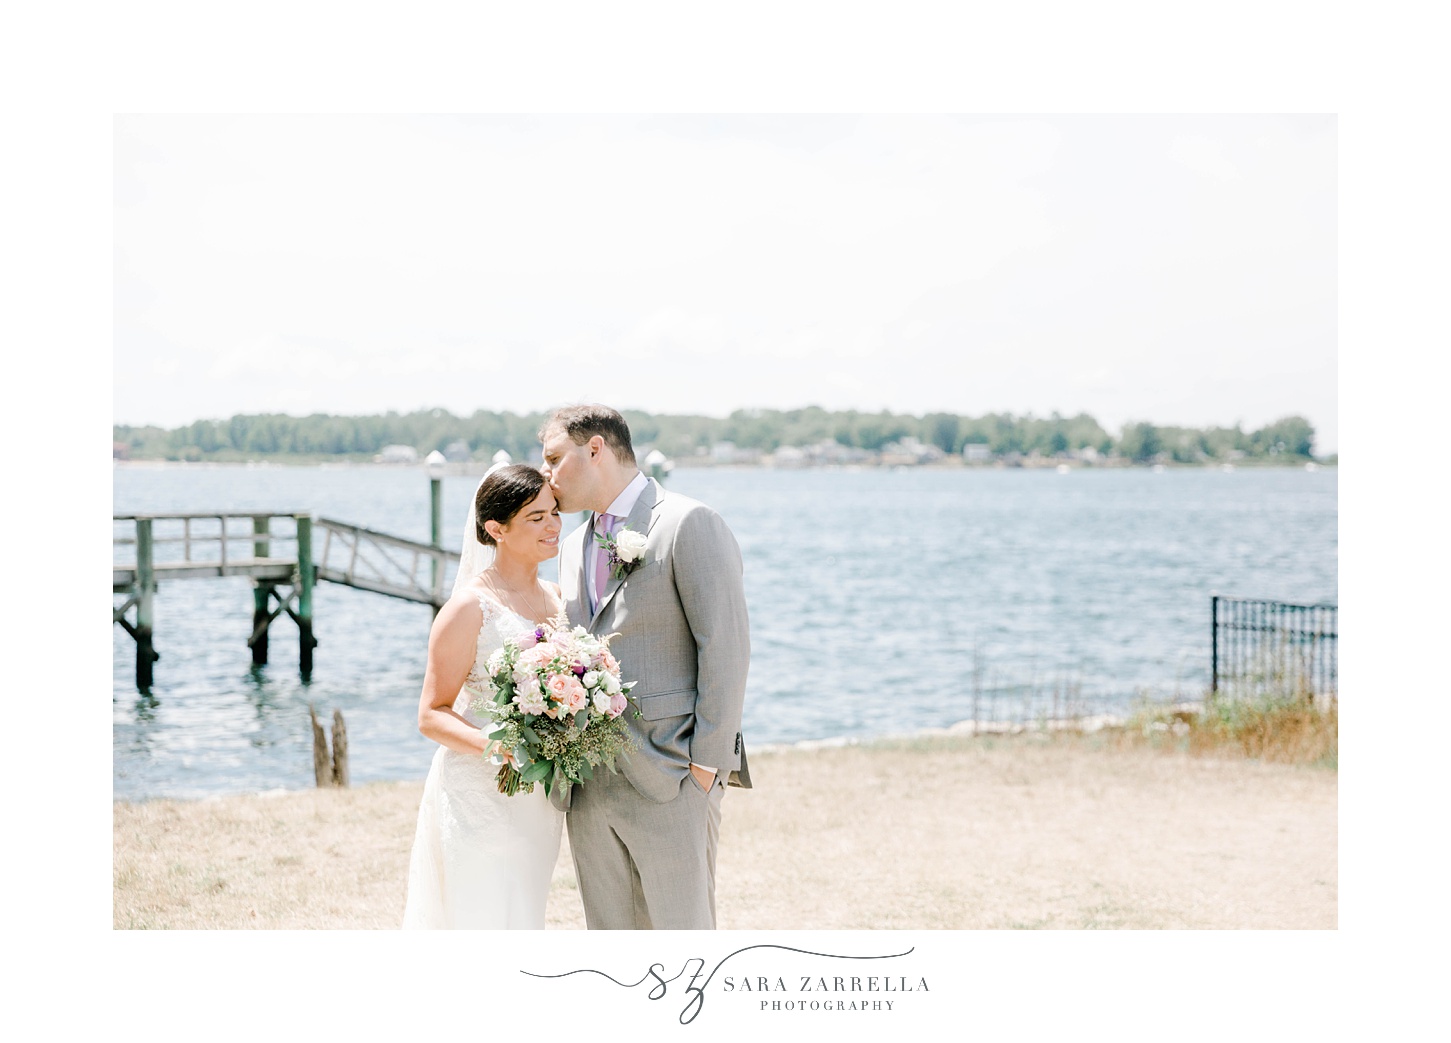 groom leans to kiss bride's forehead during portraits along water in Jewish wedding ceremony at Blithewold Mansion